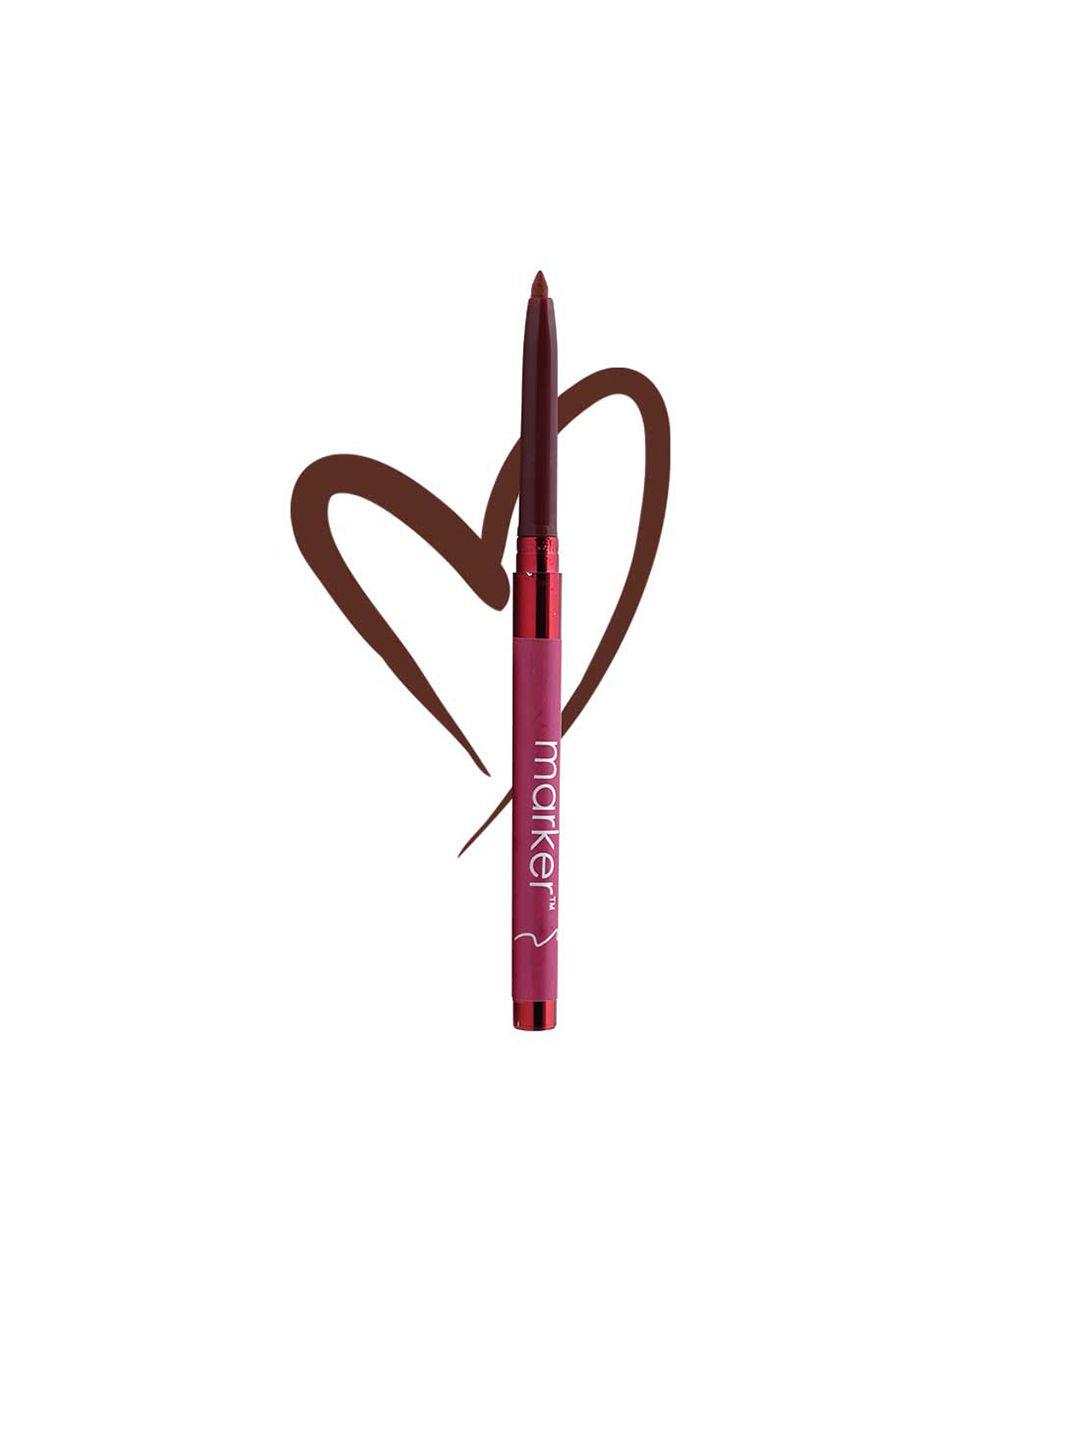 beautyrelay london outline the lips long-lasting lip liner with vitamin e 0.27g - perfect brown